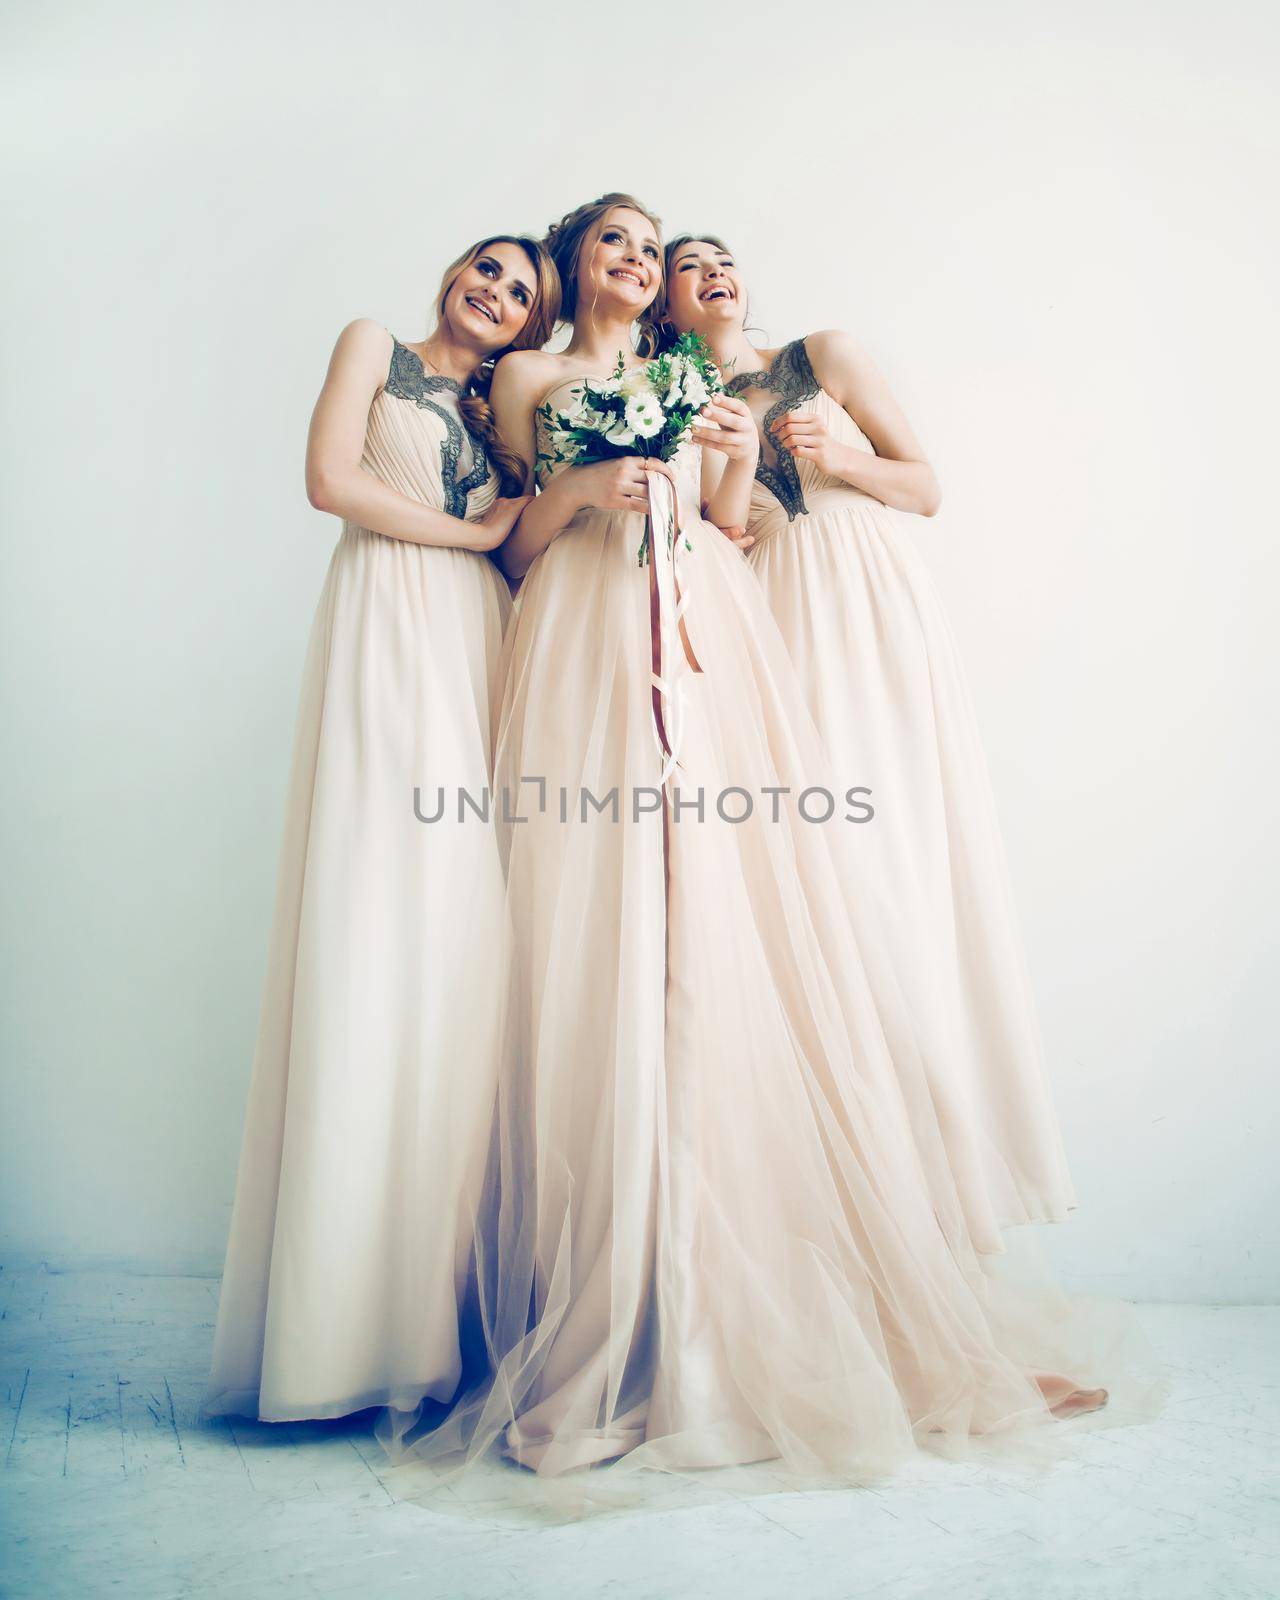 in full growth.three beautiful girls in dresses for the wedding ceremony. photo with copy space